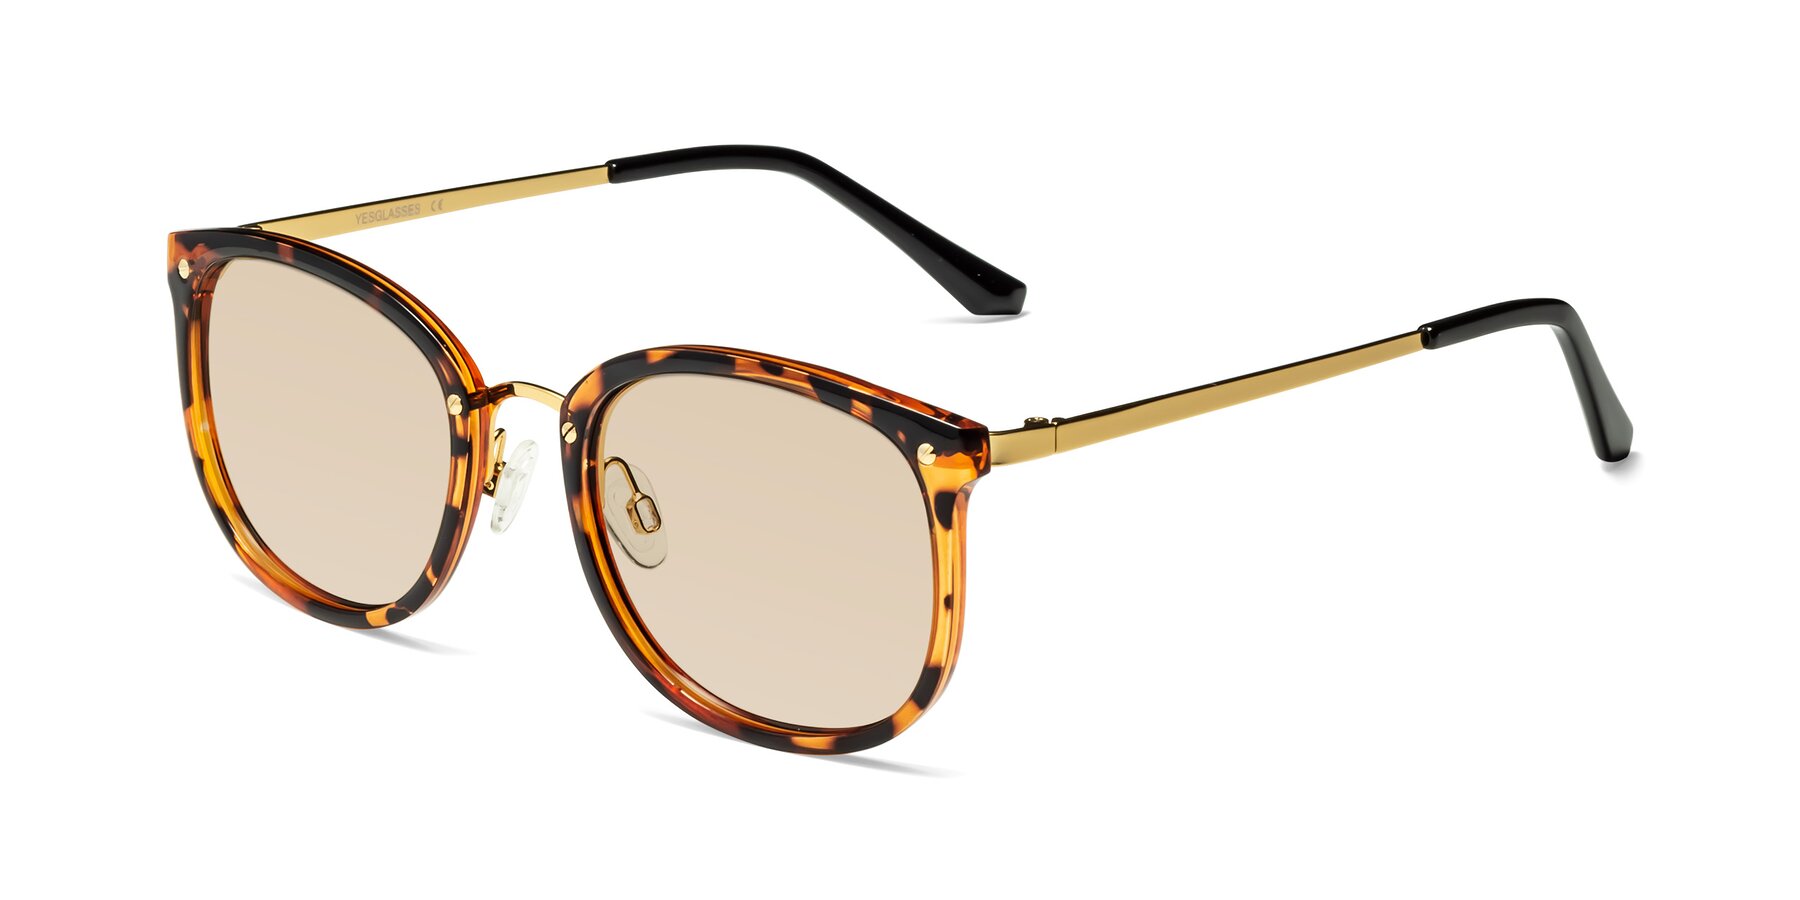 Angle of Timeless in Tortoise-Golden with Light Brown Tinted Lenses